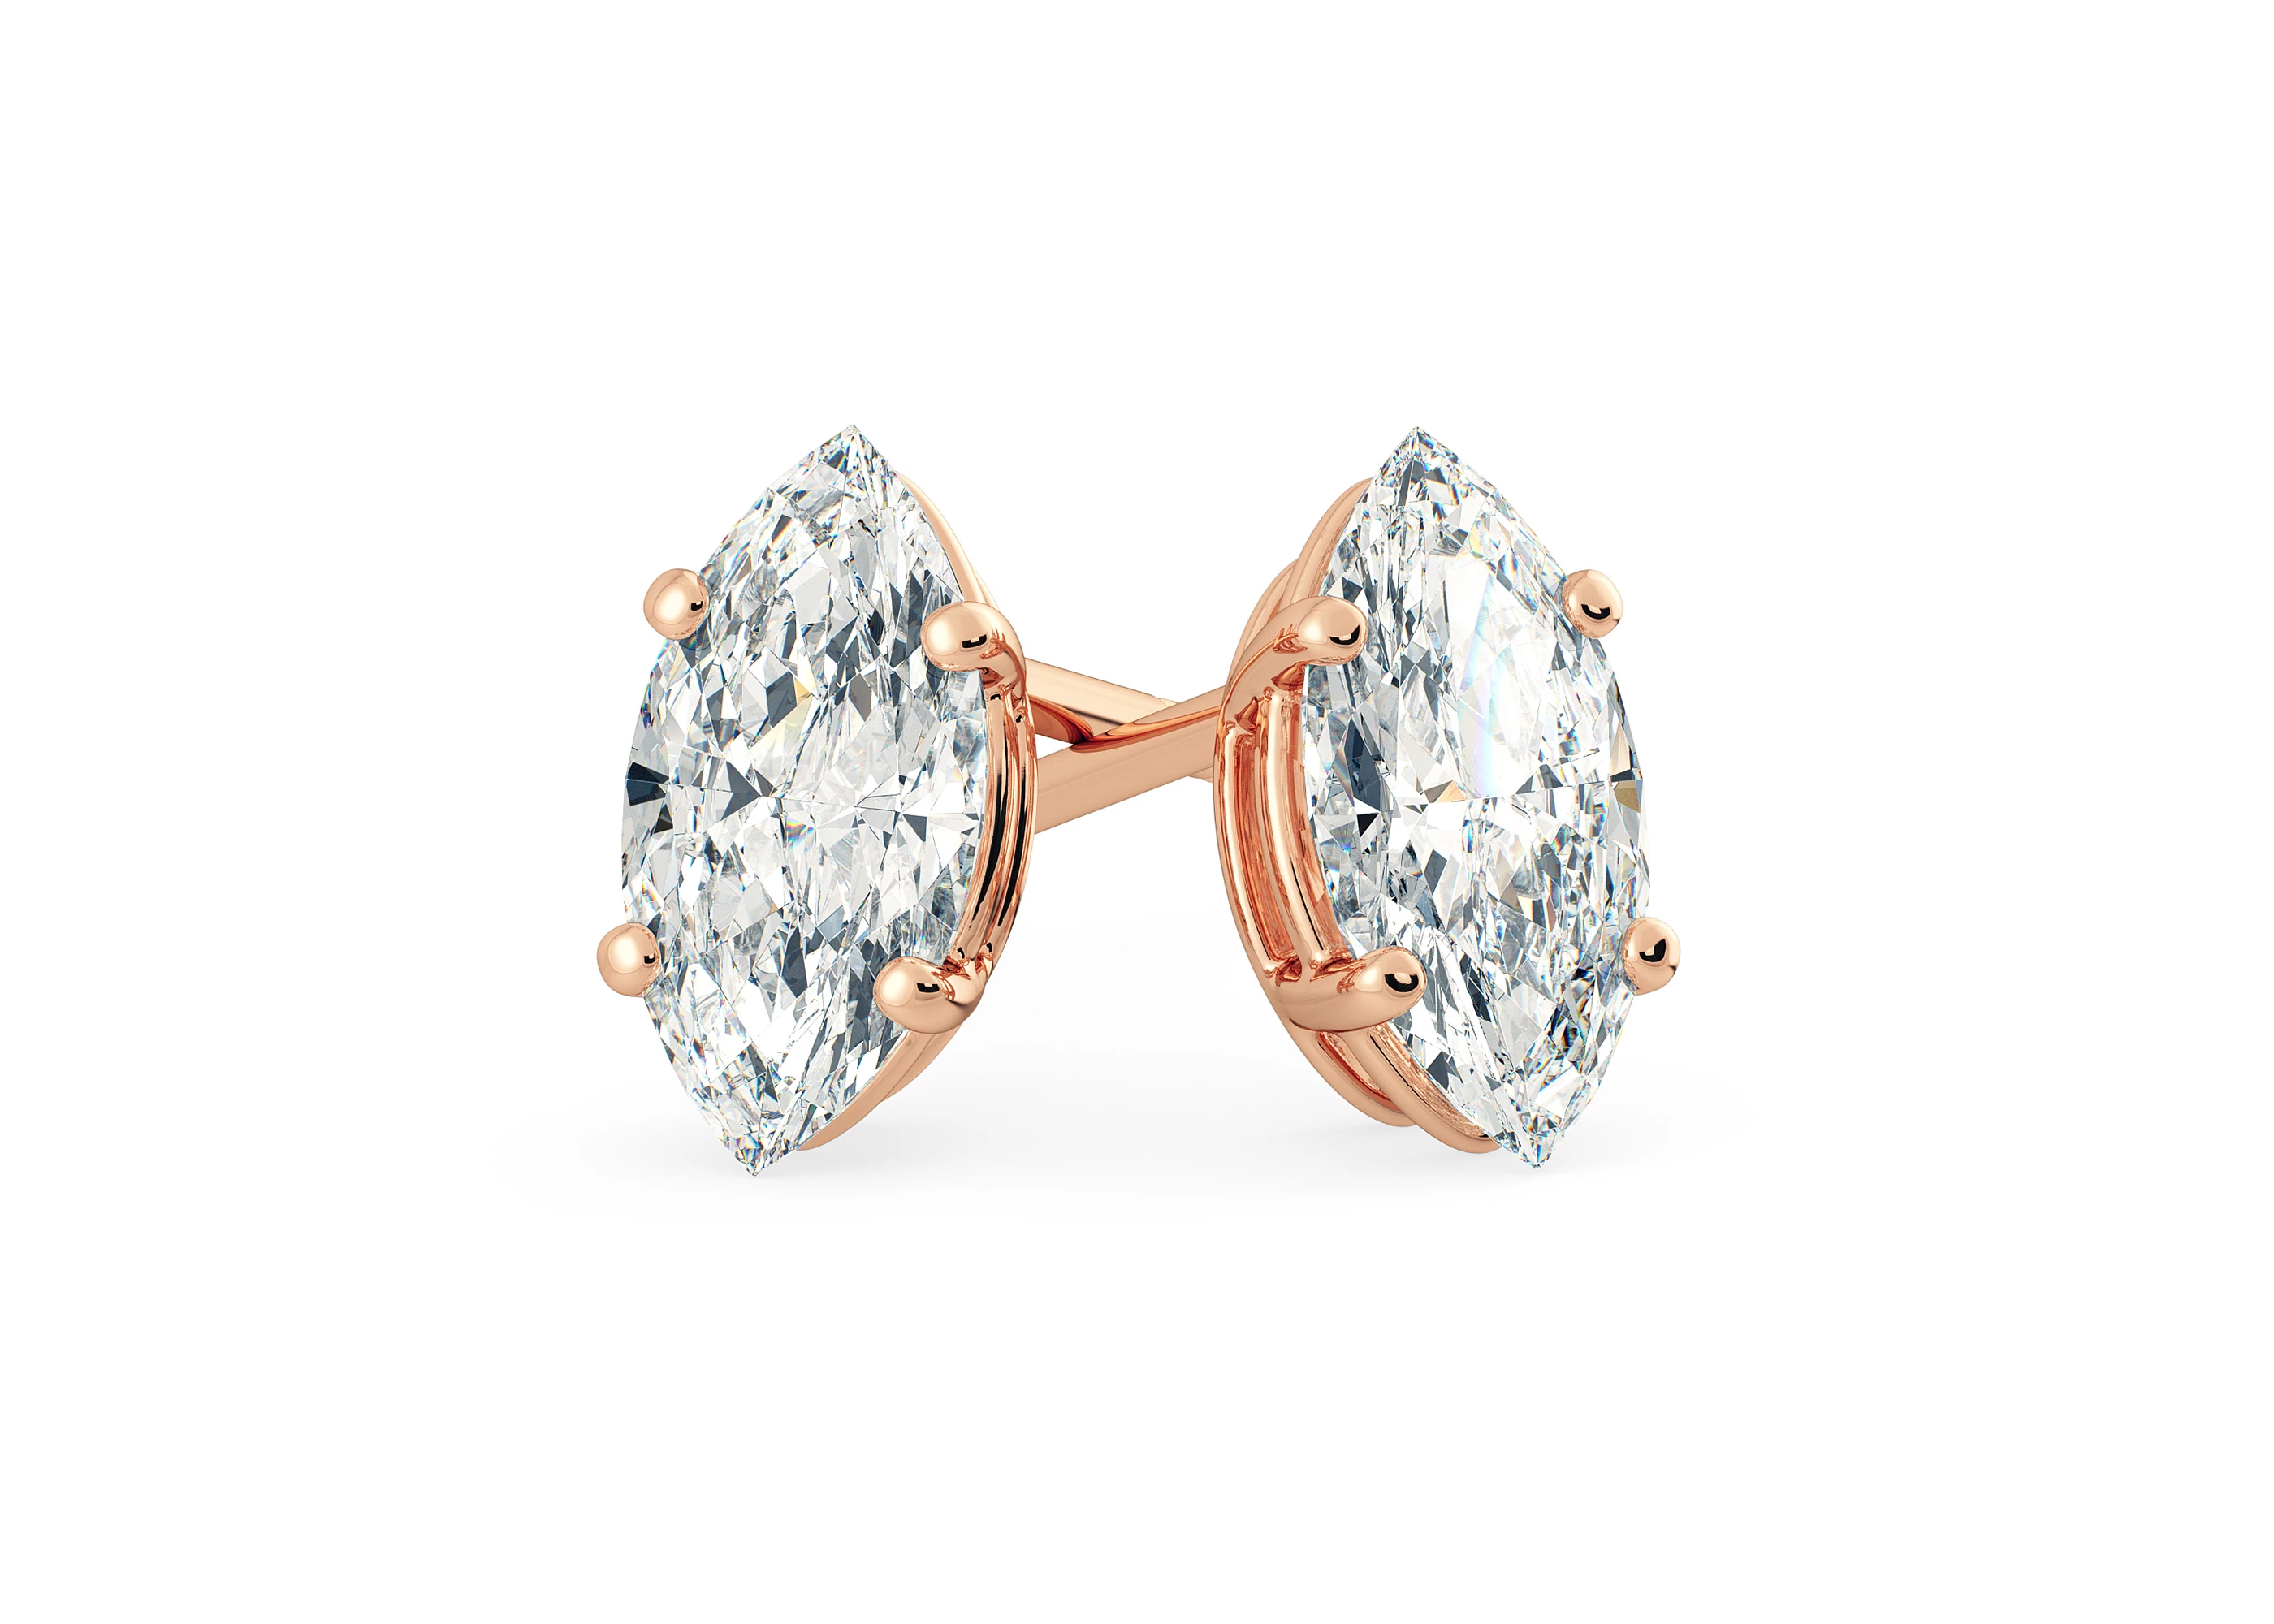 Ettore Marquise Diamond Stud Earrings in 18K Rose Gold with Butterfly Backs